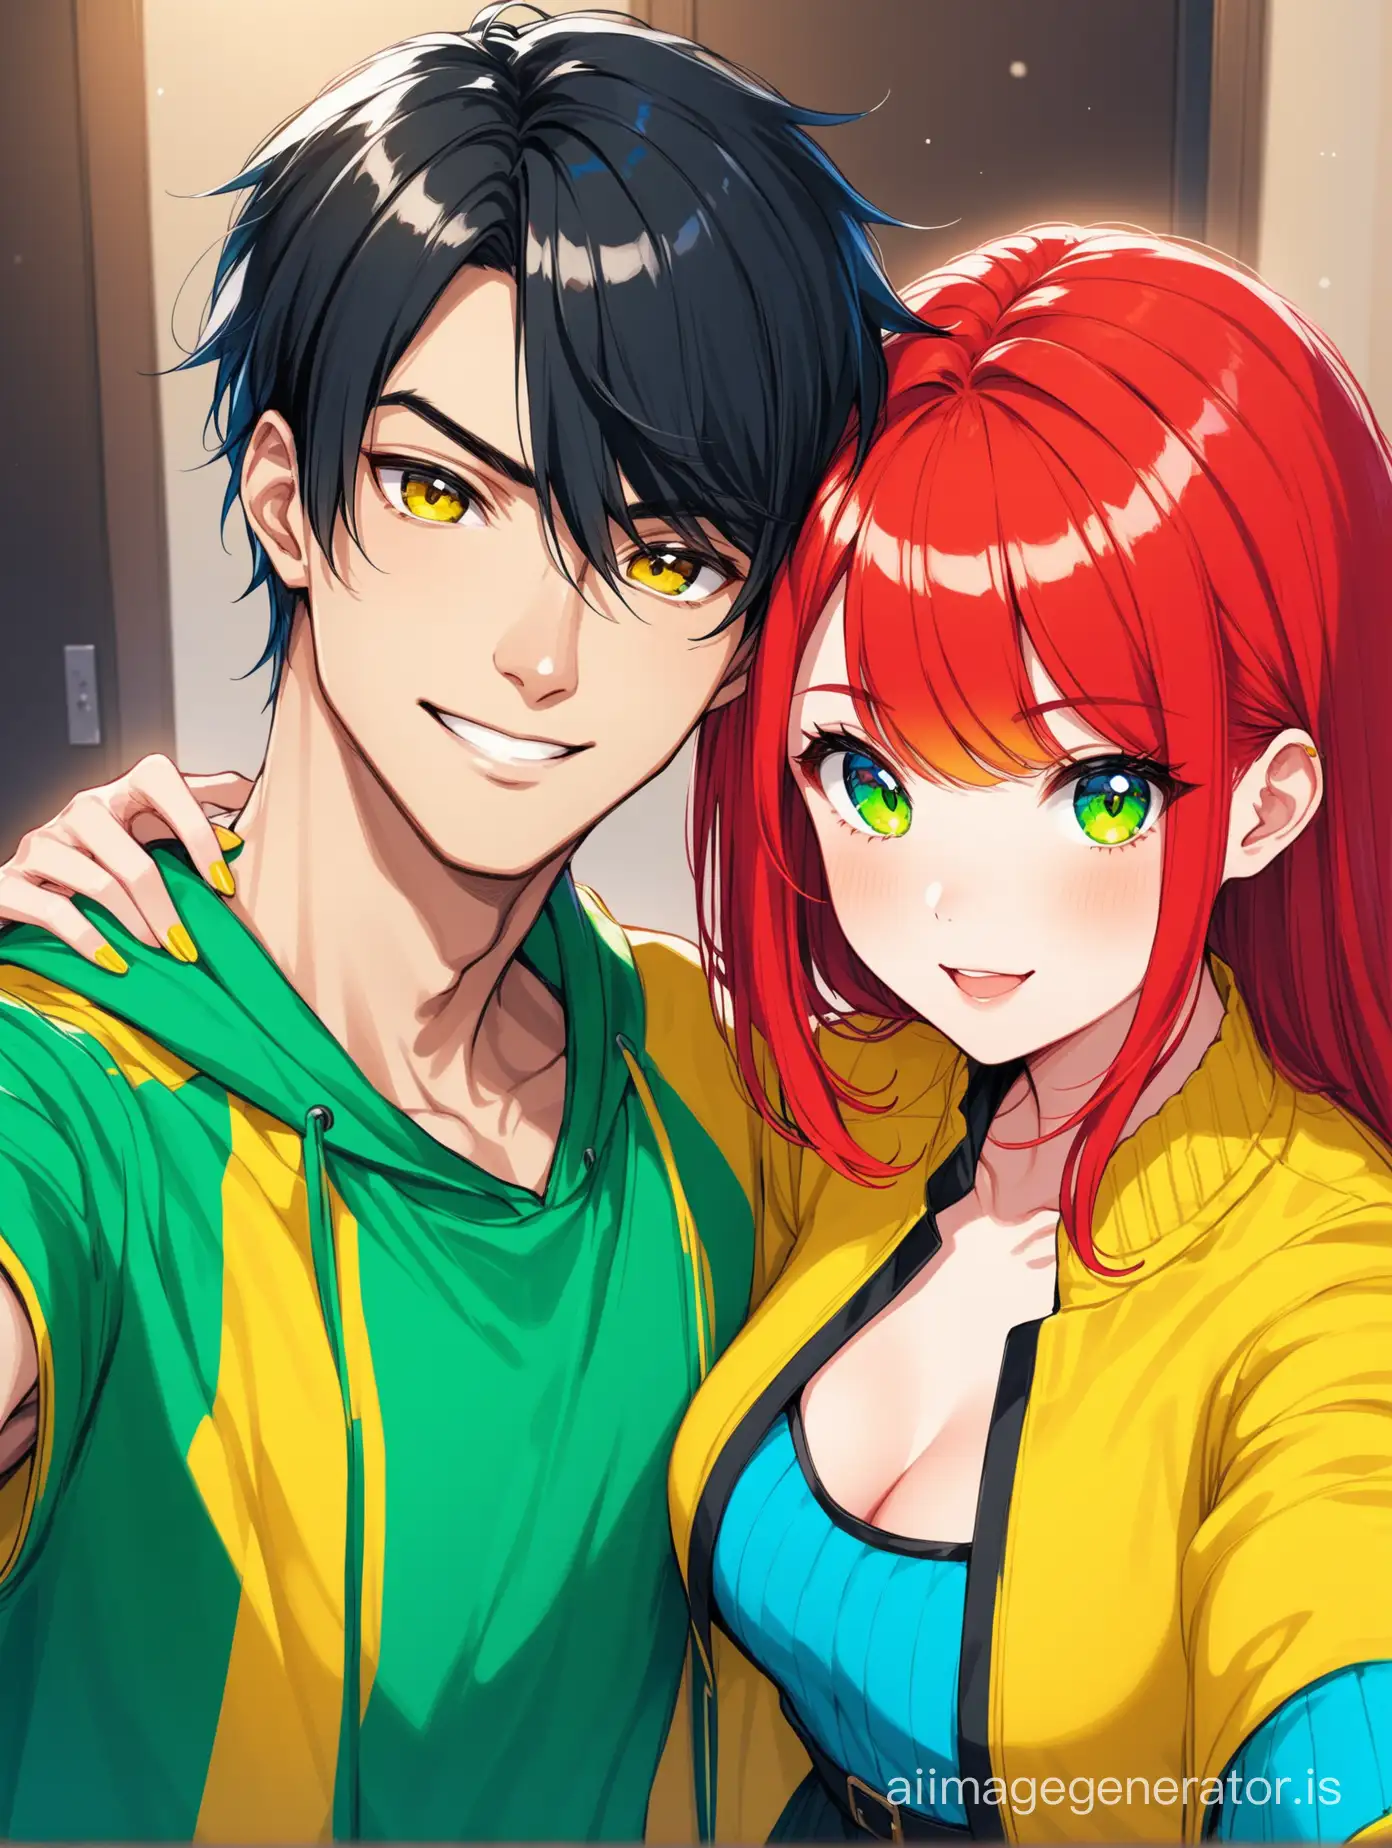 Selfie girl with bright red hair dressed in clothing of yellow, blue, and green colors, with a guy with black hair who is taller than her dressed in clothing of white, blue, red colors